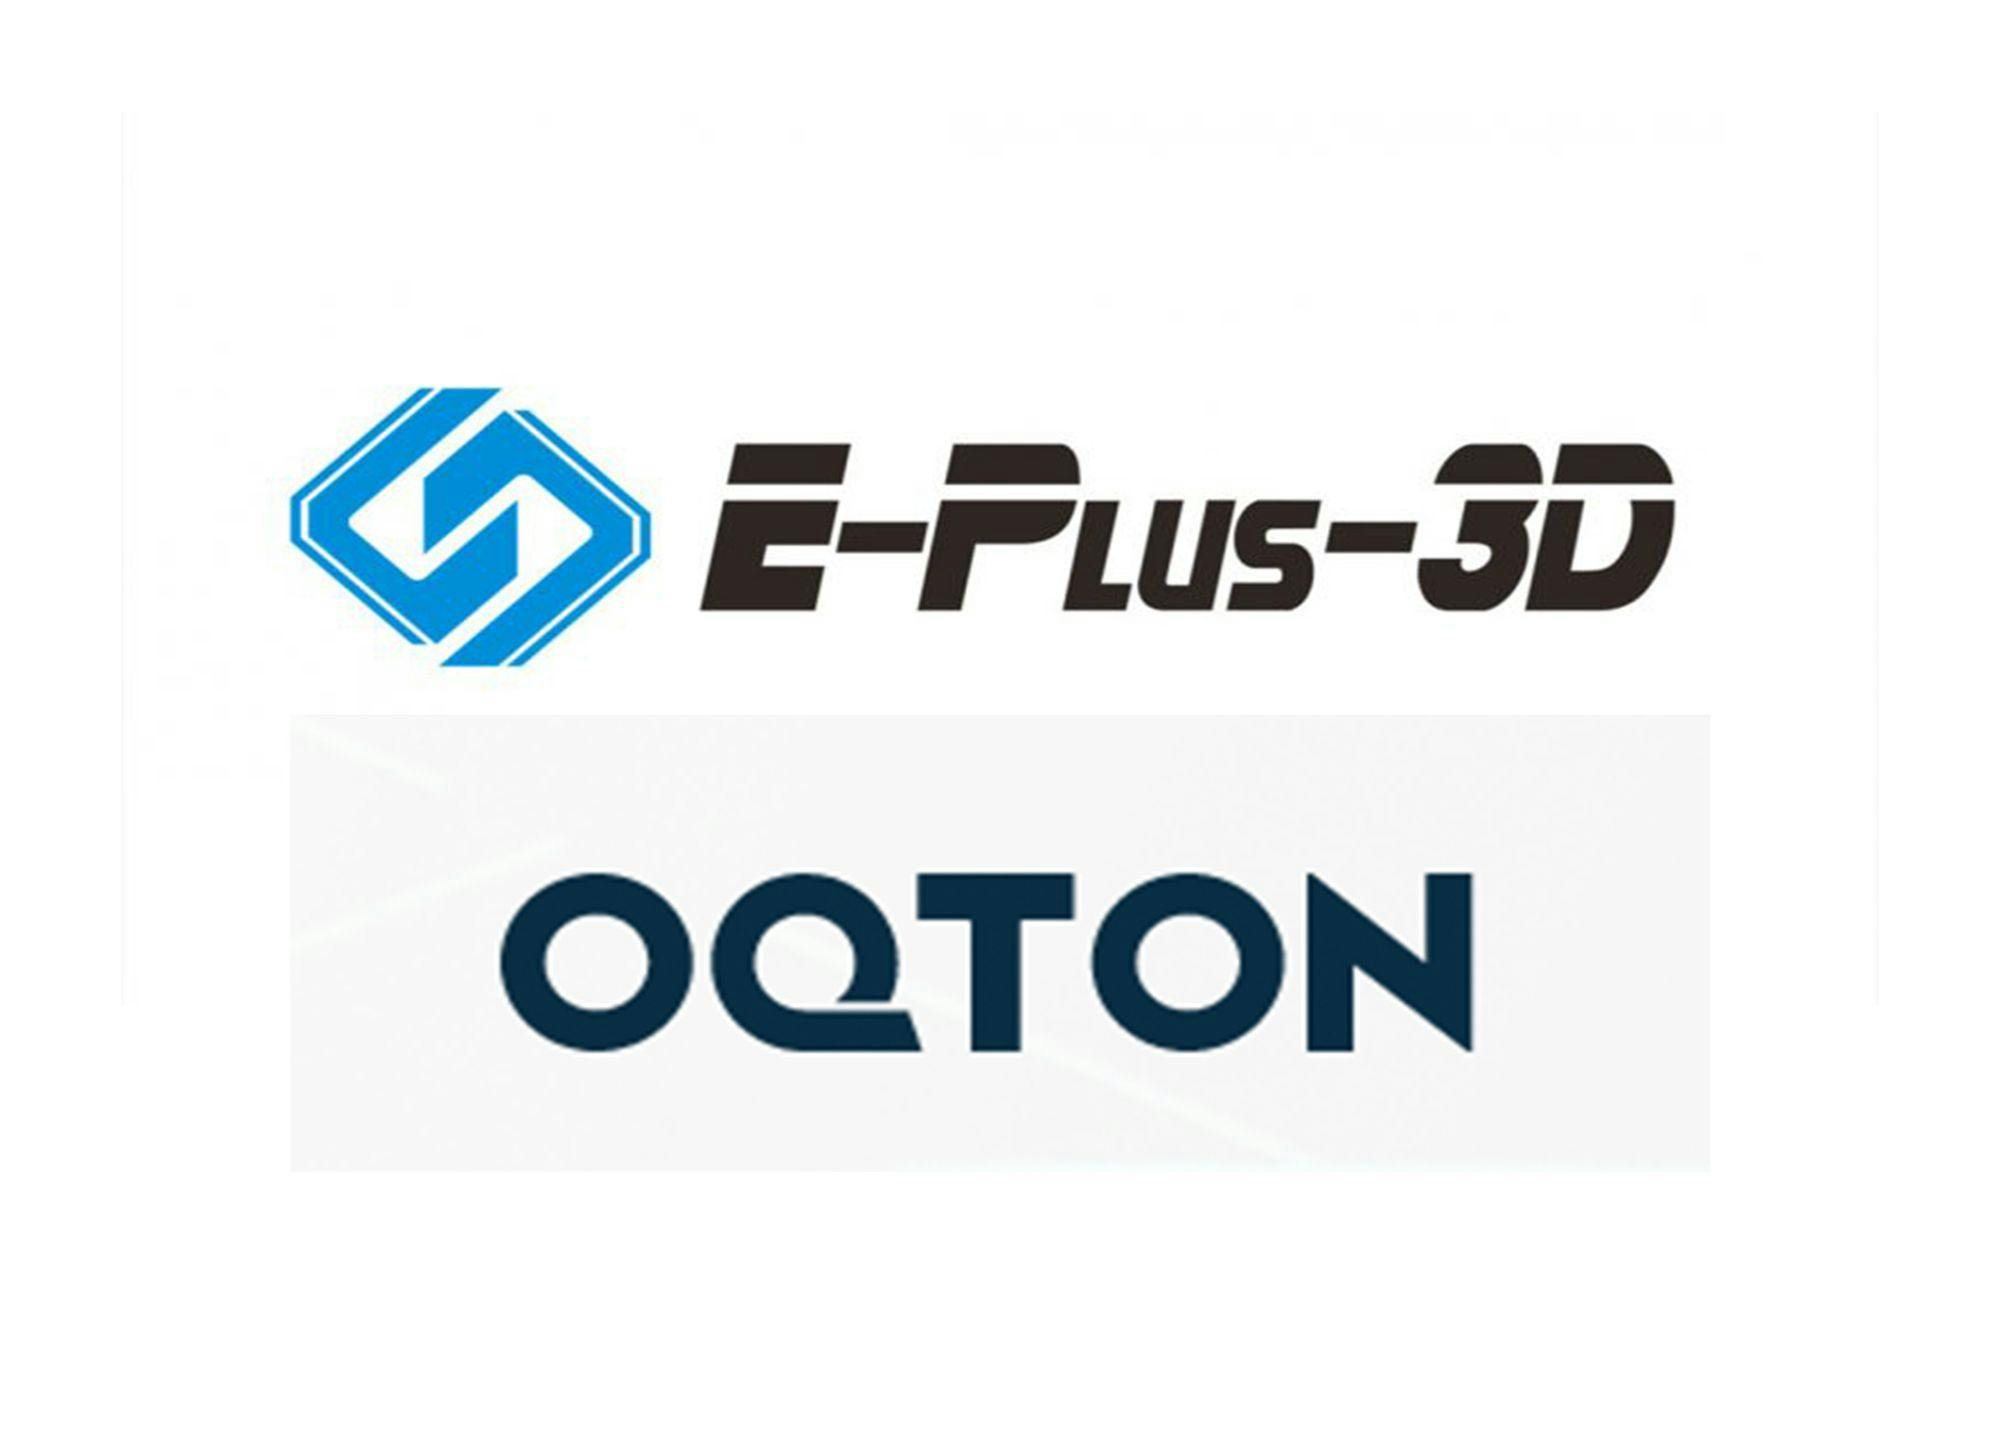 Oqton and Eplus3D Partner Up to Boost Dental Lab Workflows